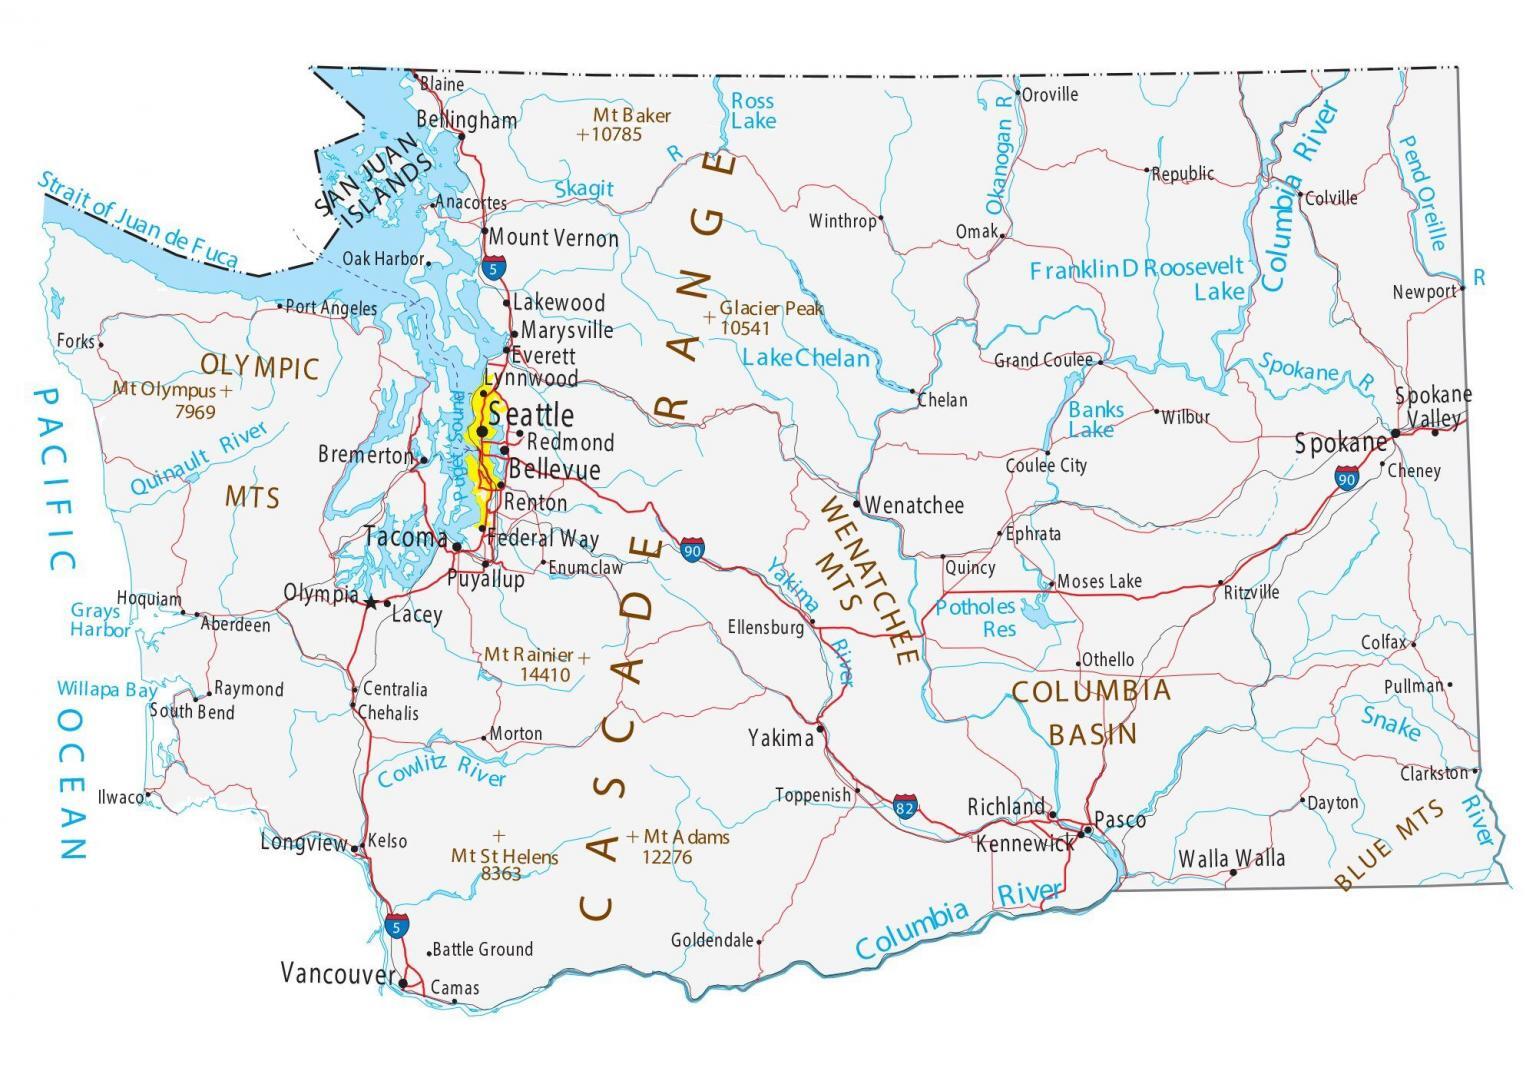 Map of Washington - Cities and Roads - GIS Geography 